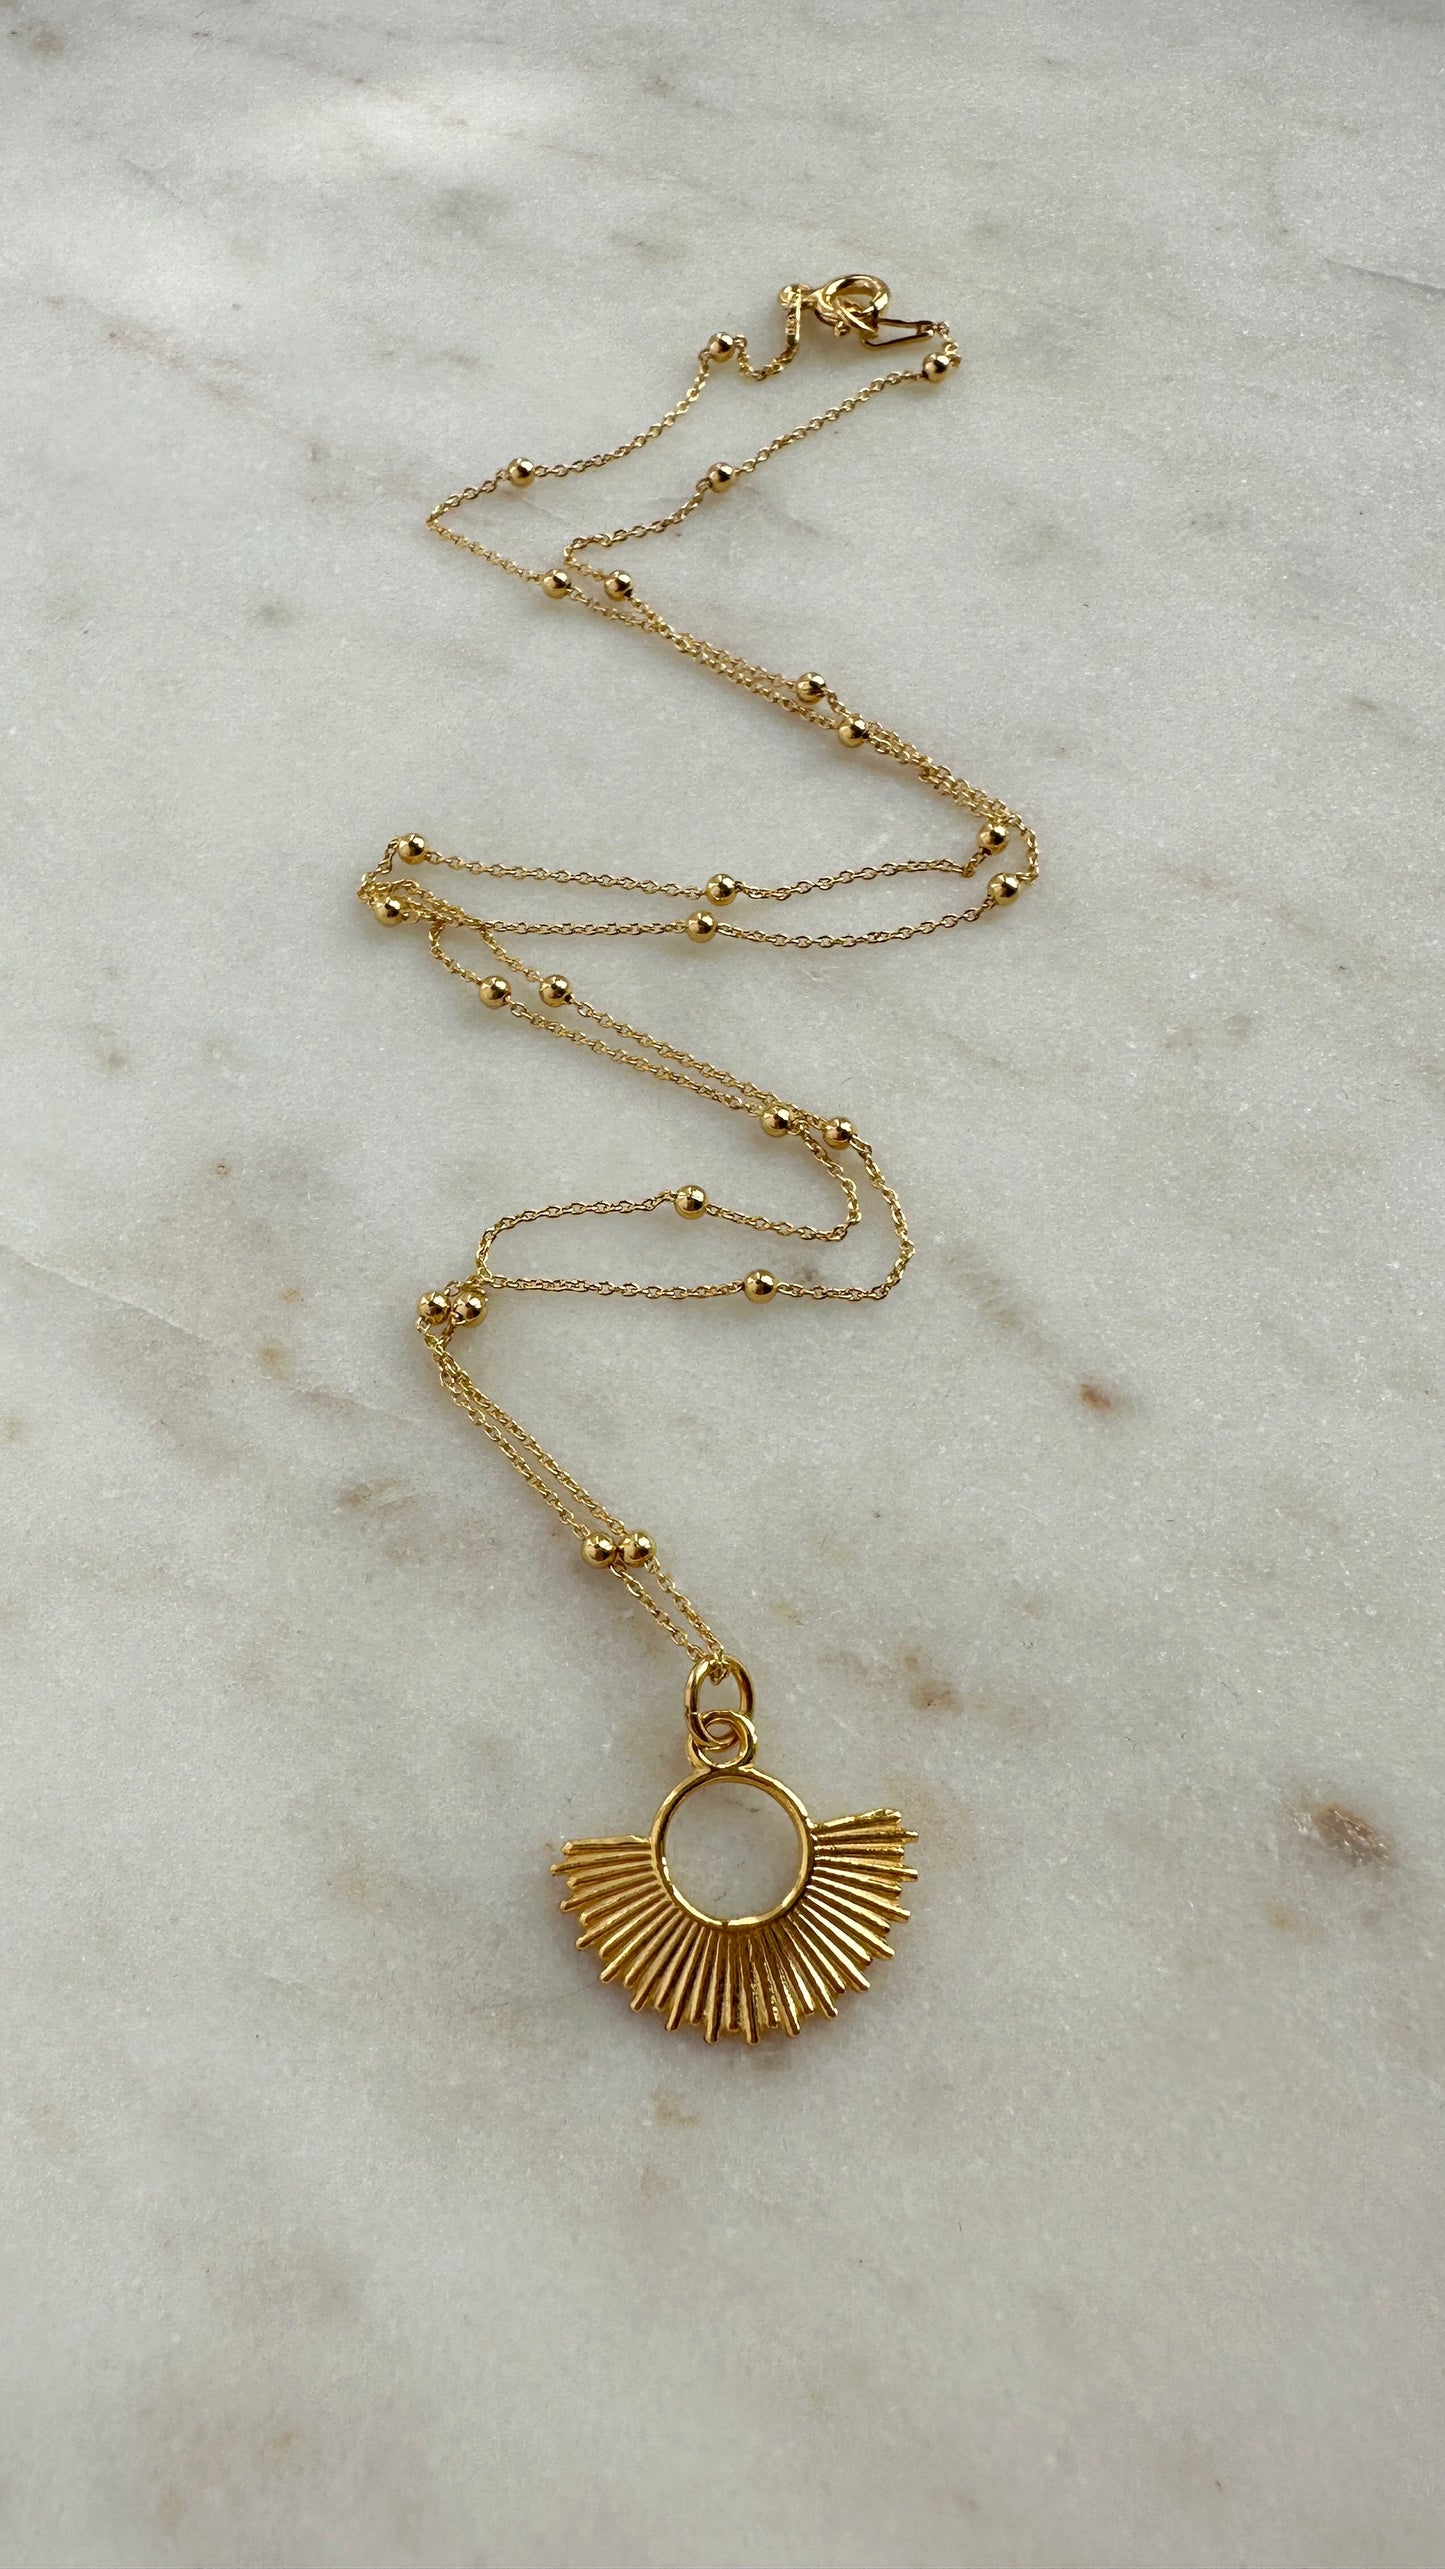 Solar Flare necklace